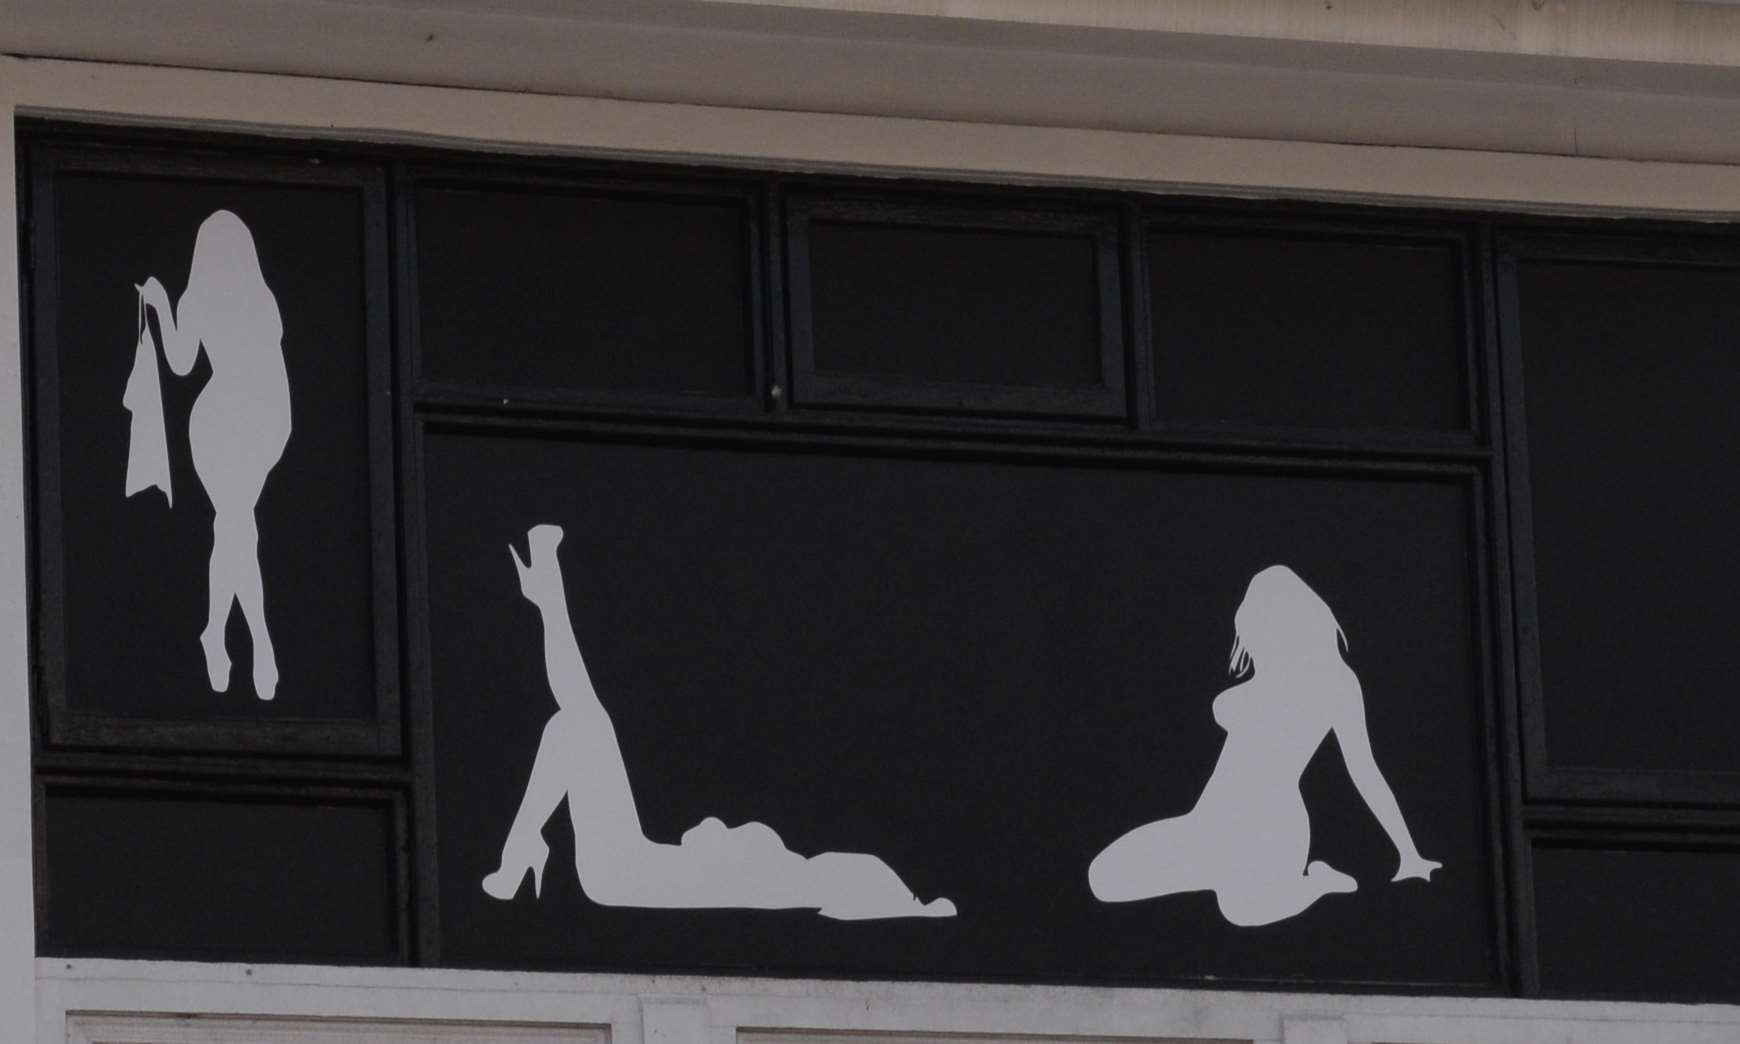 he silhouettes in the windows of the Bing Club in Dover Streeet, Canterbury